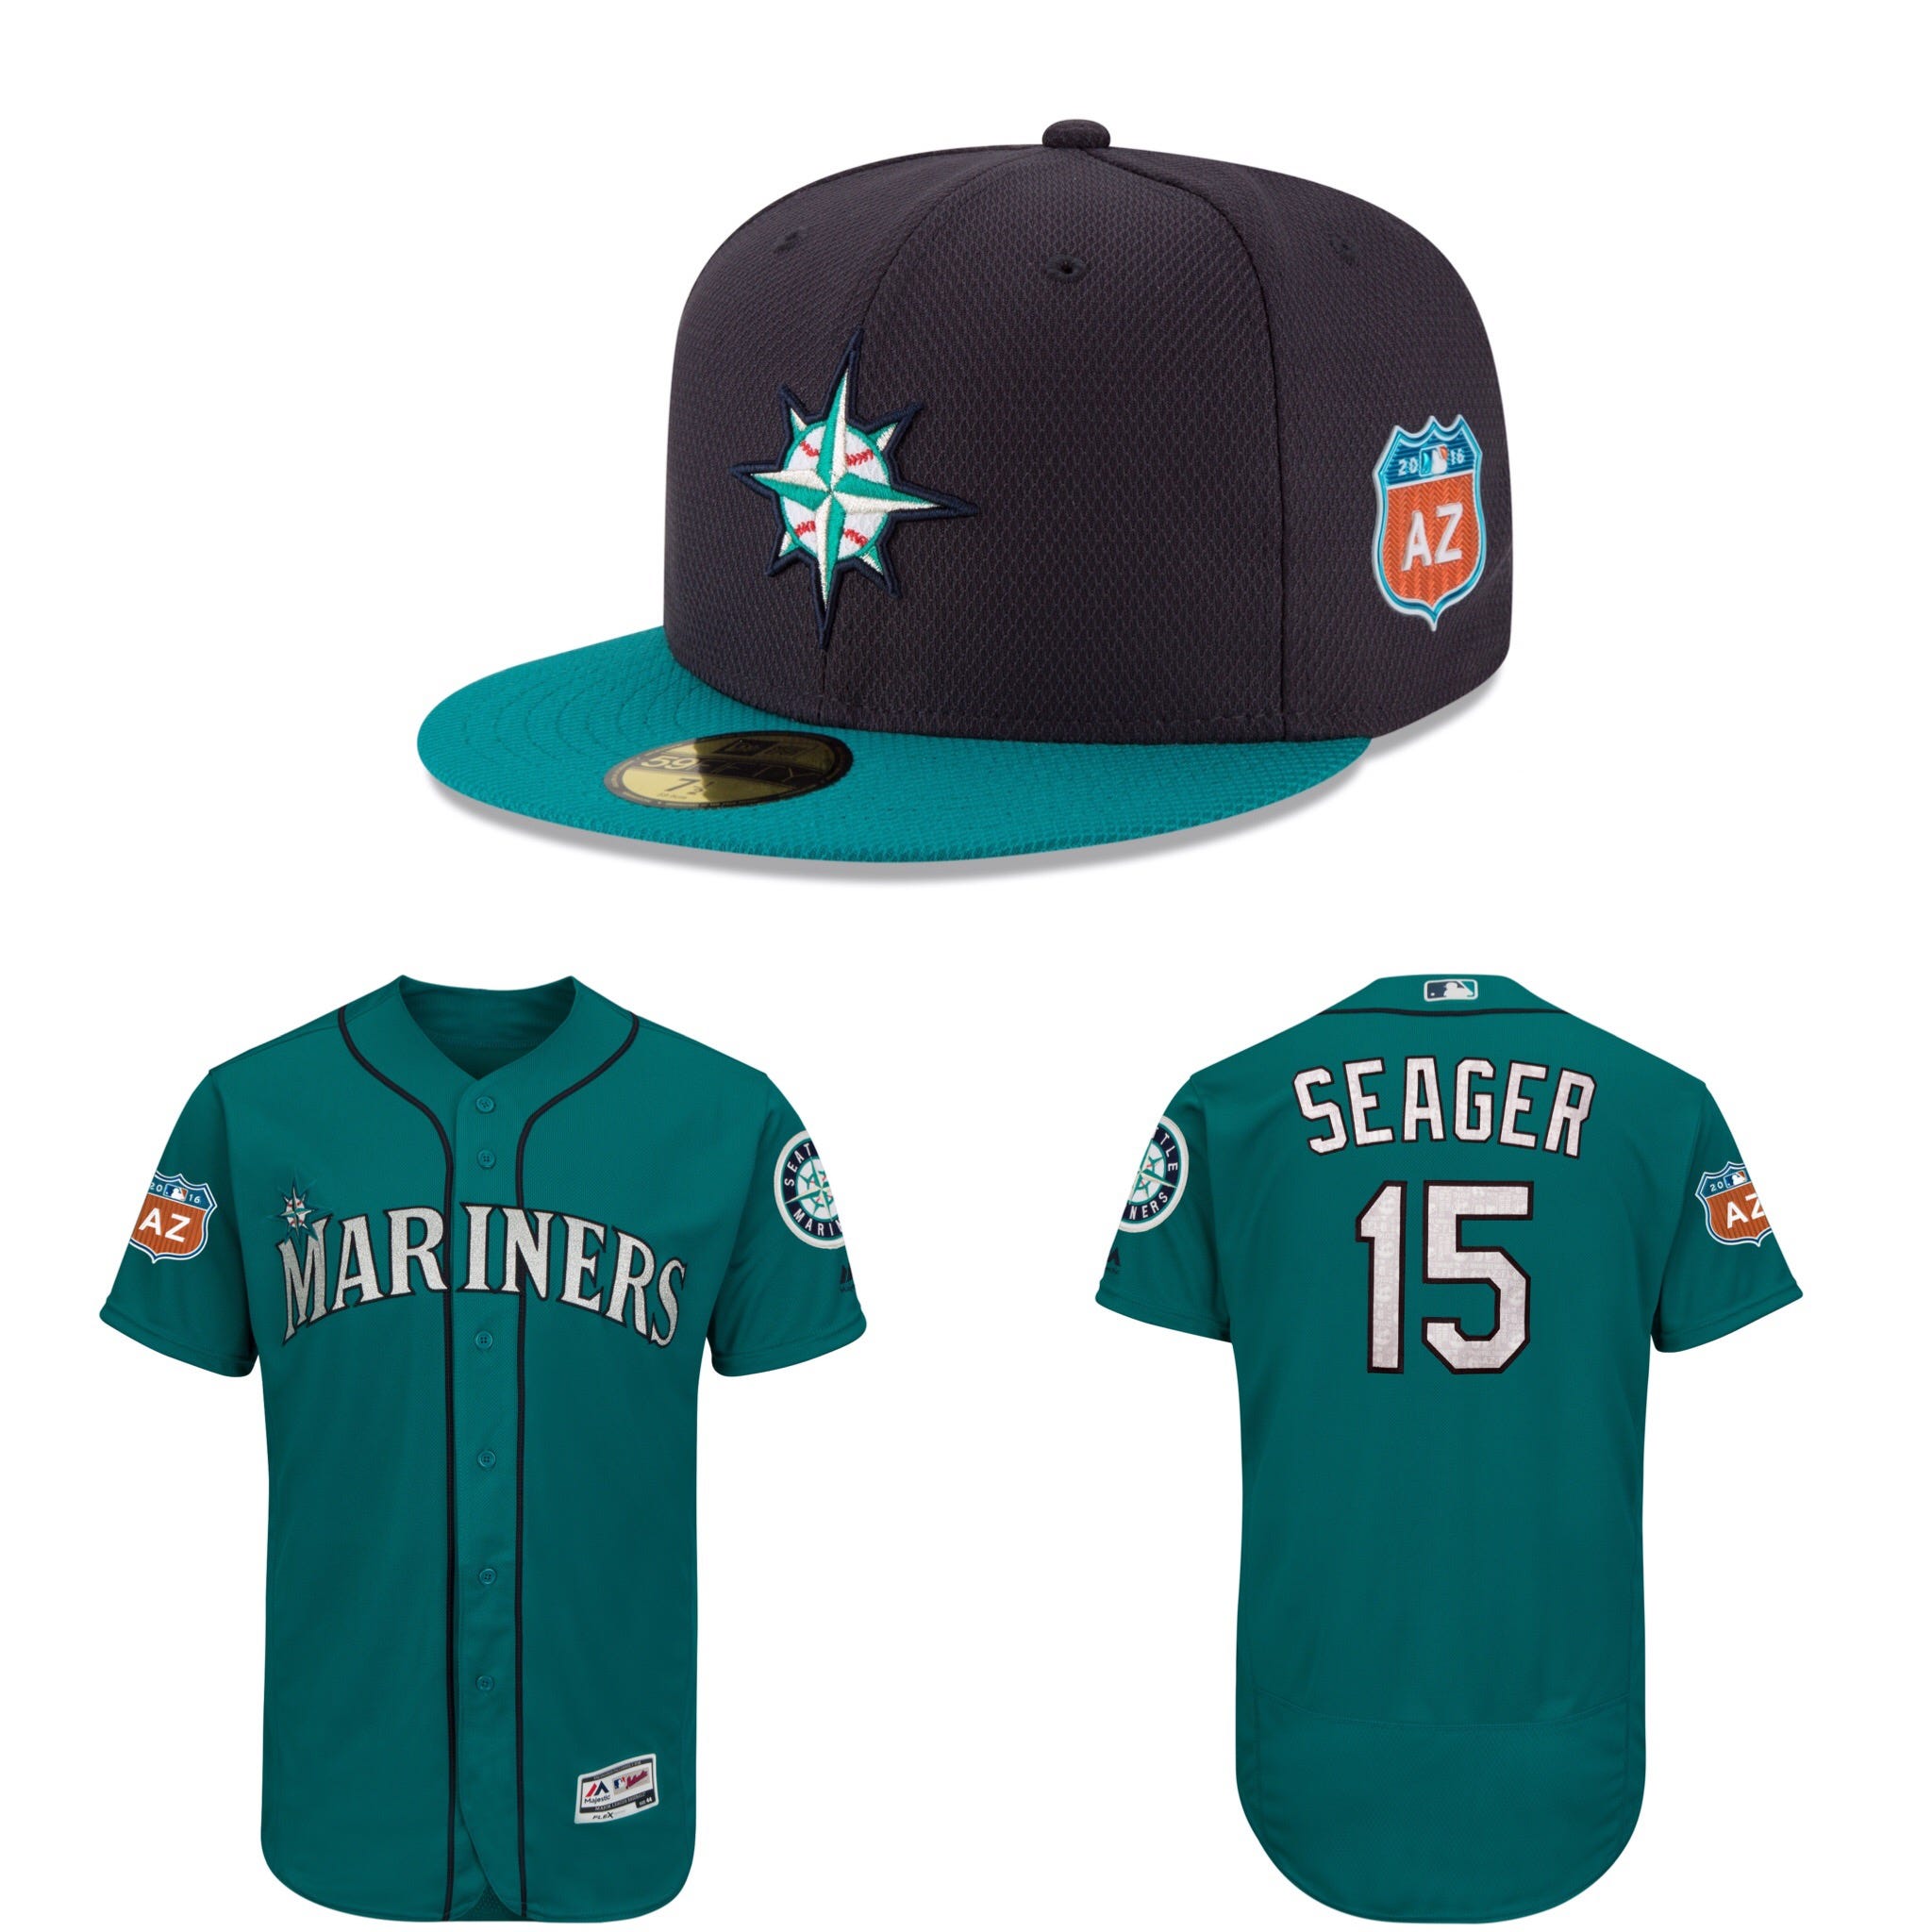 mariners red jersey